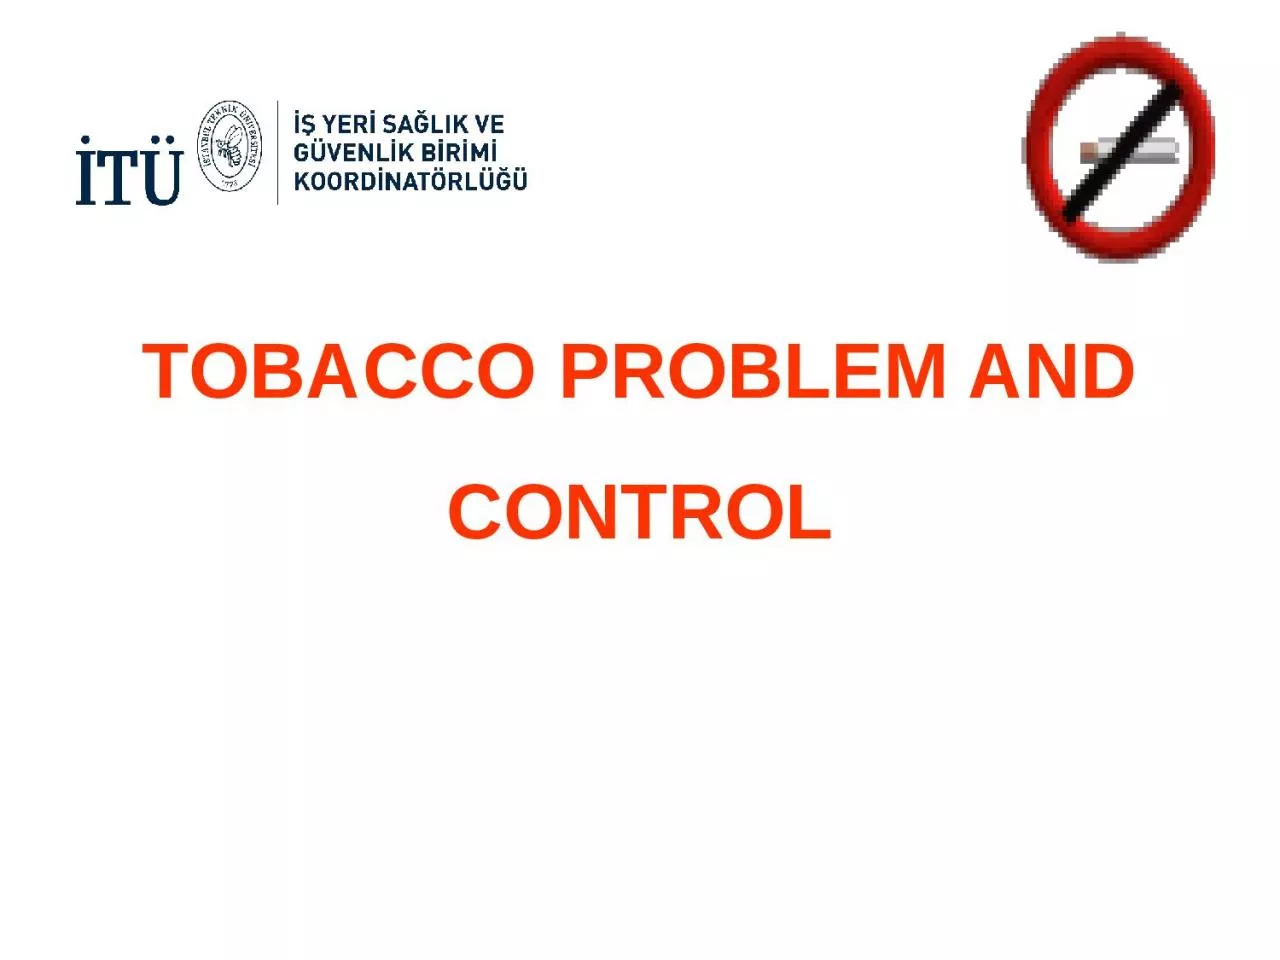 TOBACCO PROBLEM AND CONTROL